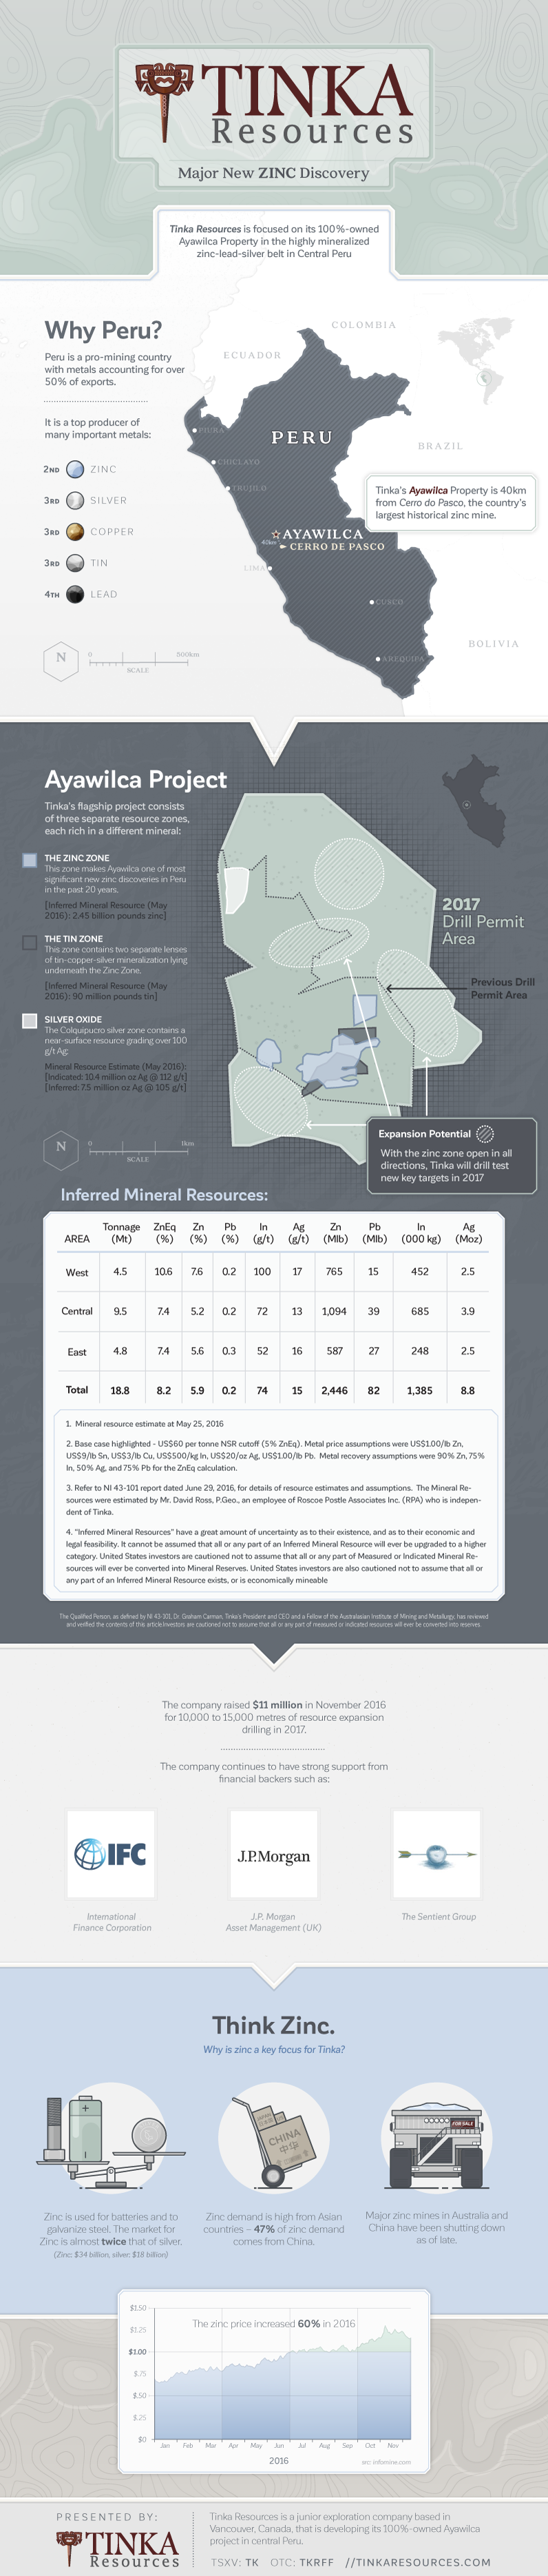 Tinka Resources: Major New Zinc Discovery #infographic